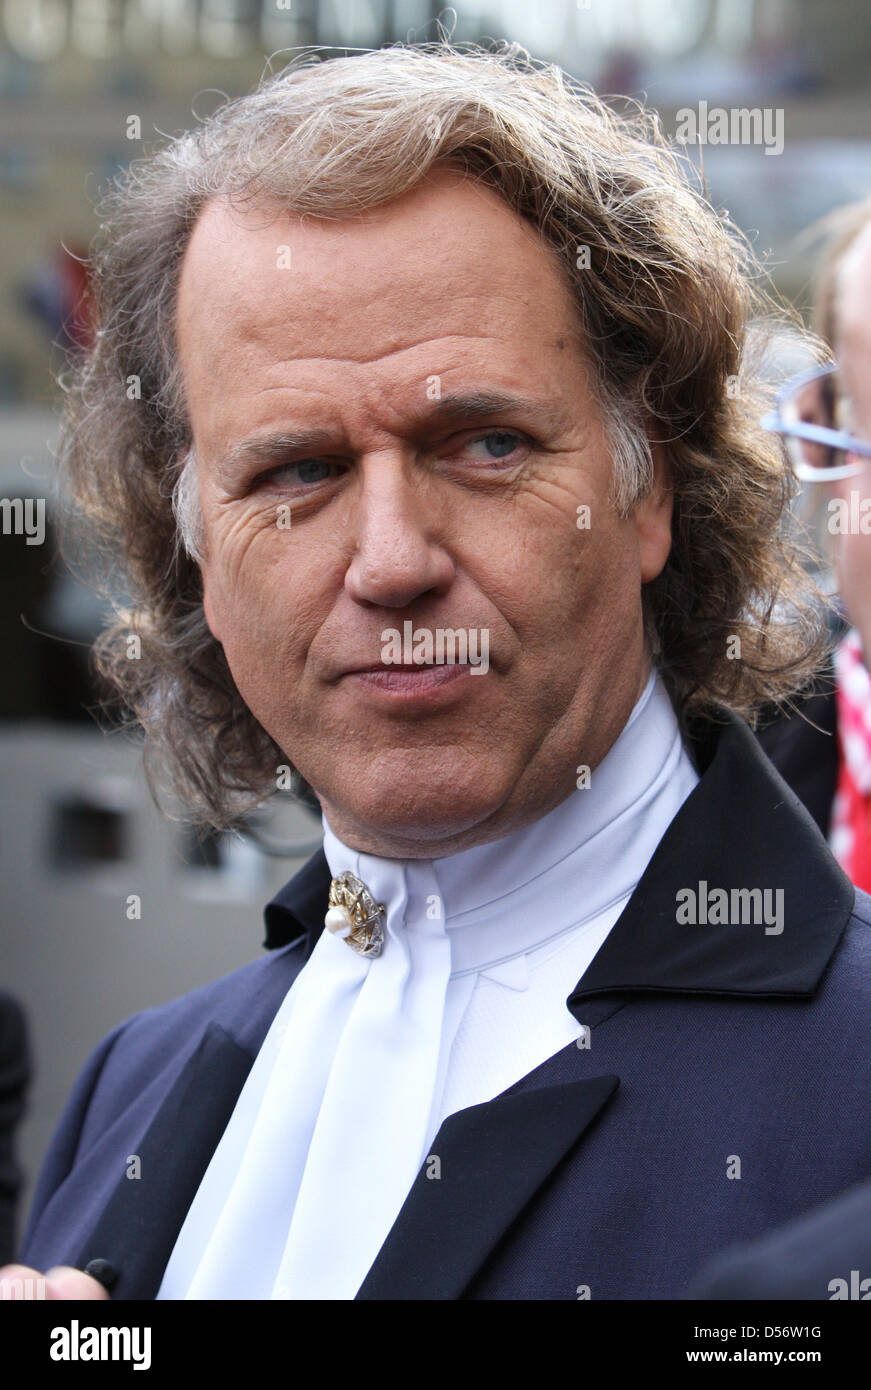 Dutch violinist Andre Rieu attends the opening of the jubilee year of the tourist promotion office VVV in Valkenburg, the Netherlands, 26 March 2010. This year the VVV, the organisation that promotes tourism, recreation and leisure in the Netherlands, celebrates its 125th anniversary. The first VVV was founded on 22 February 1885 in Valkenburg aan de Geul. Photo: Albert Philip van  Stock Photo